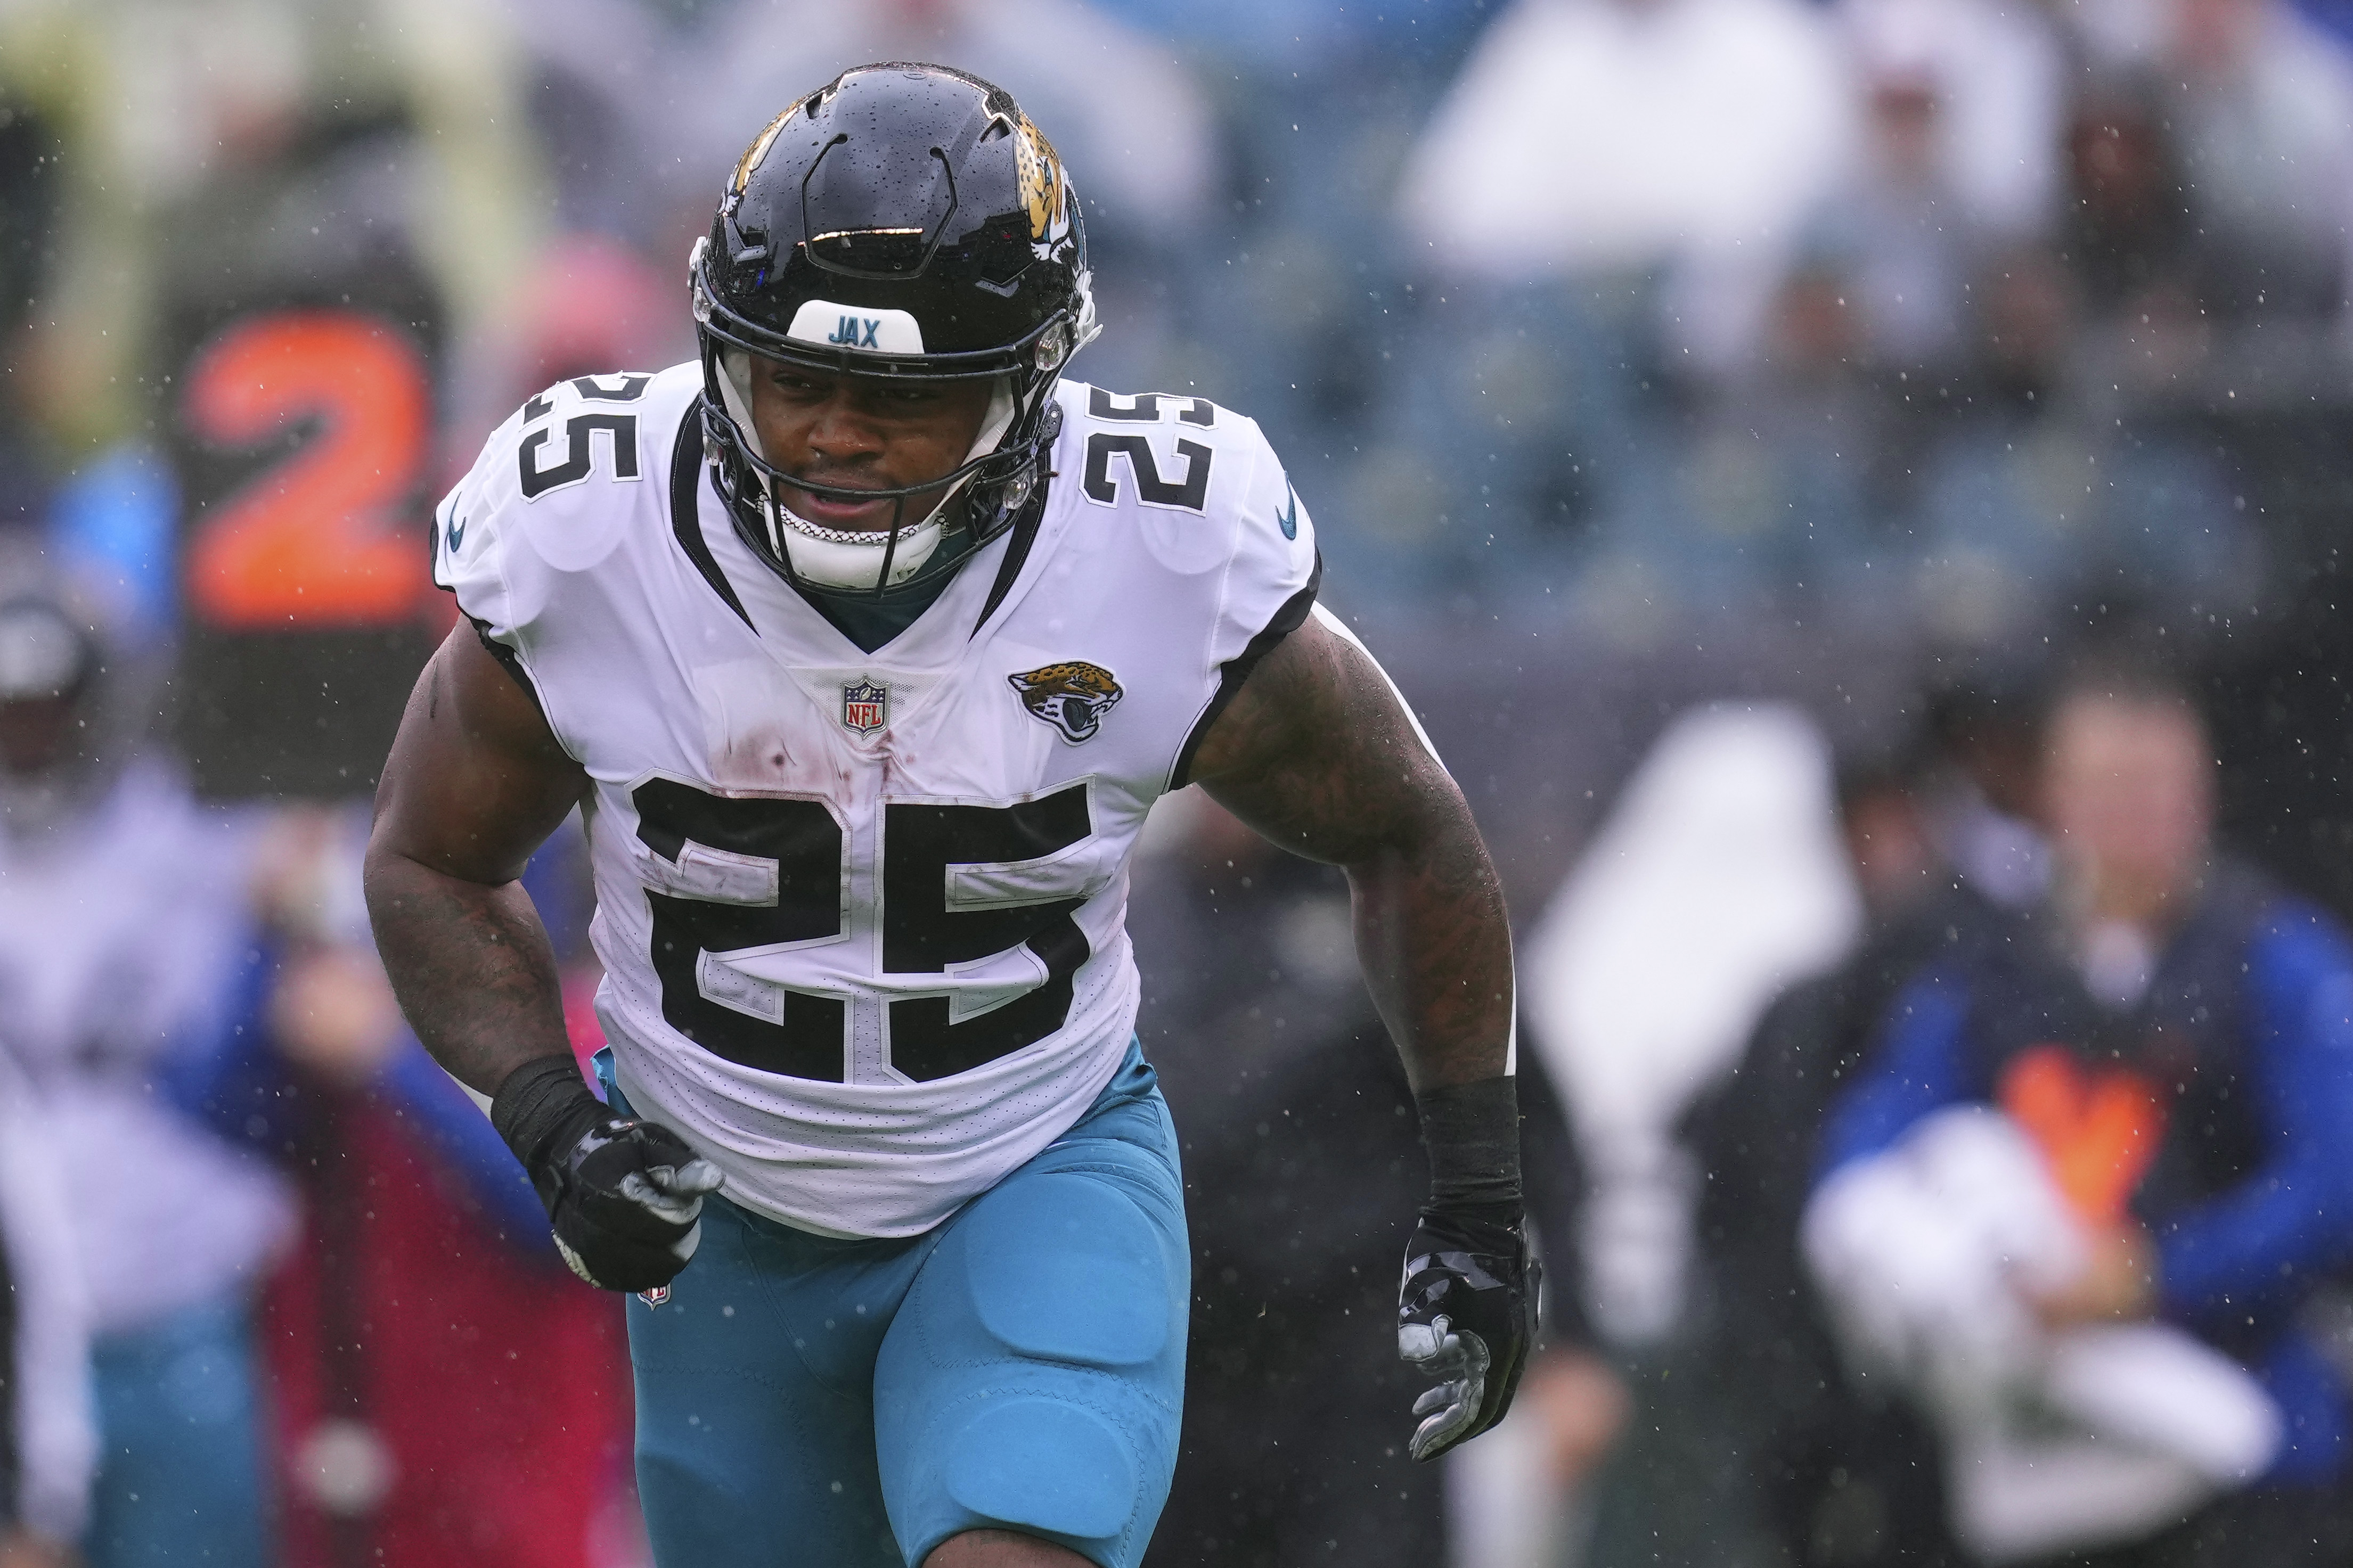 James Robinson #25 of the Jacksonville Jaguars in action against the Philadelphia Eagles at Lincoln Financial Field on October 2, 2022 in Philadelphia, Pennsylvania.